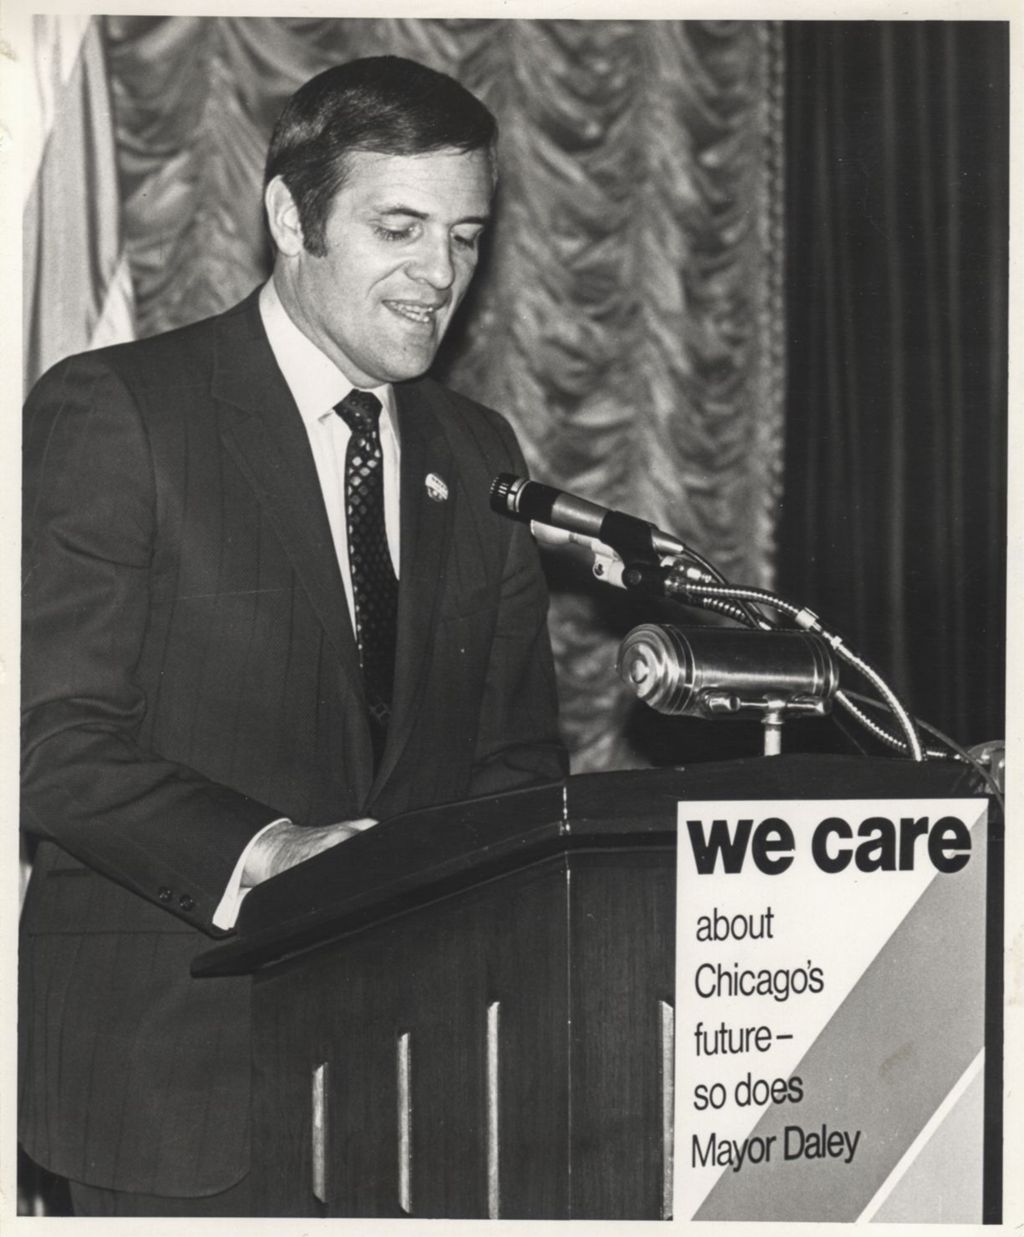 Miniature of Man speaking at a "We Care" event